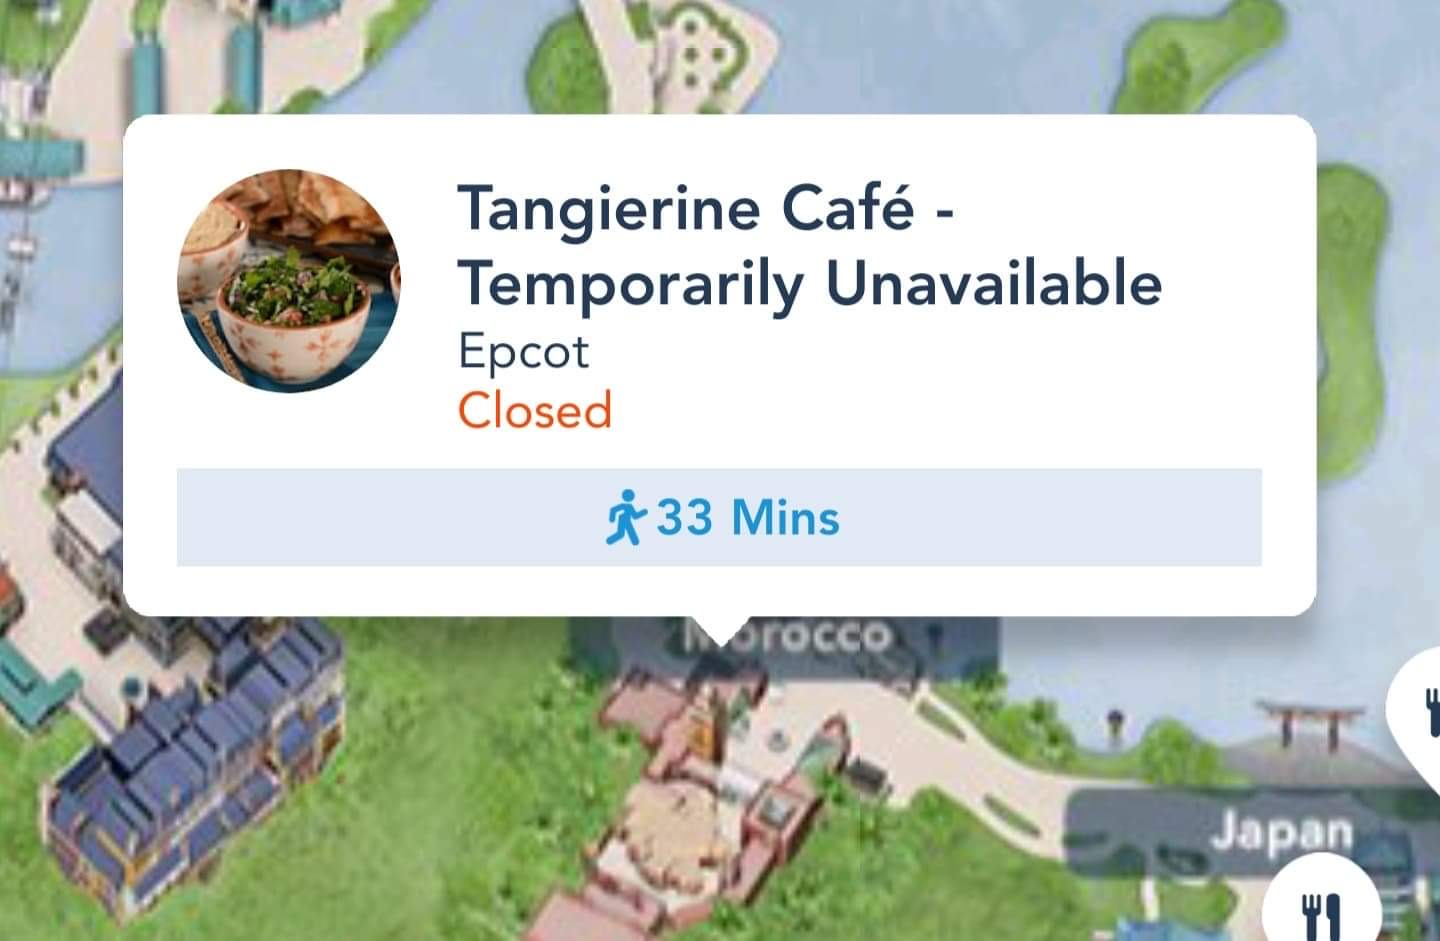 Tangerine Cafe in Epcot Temporarily Closed